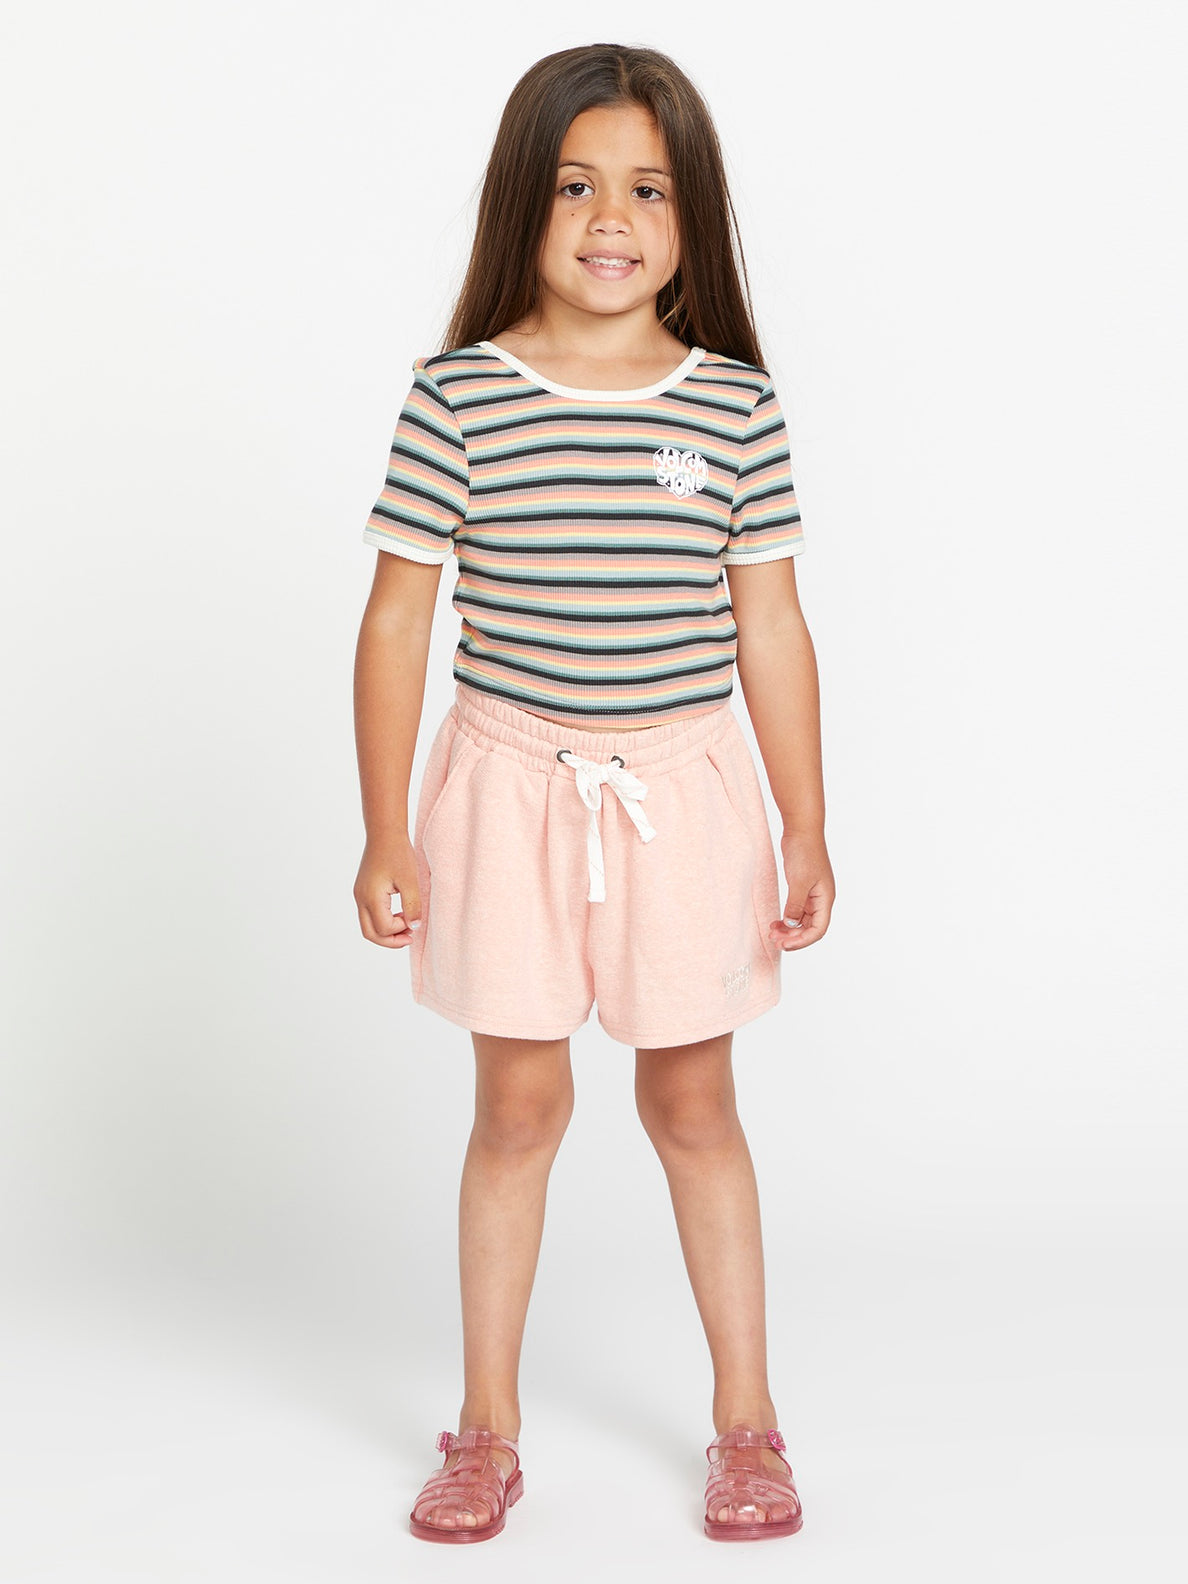 Girls Lived in Lounge Knit Short Sleeve Shirt - Reef Pink